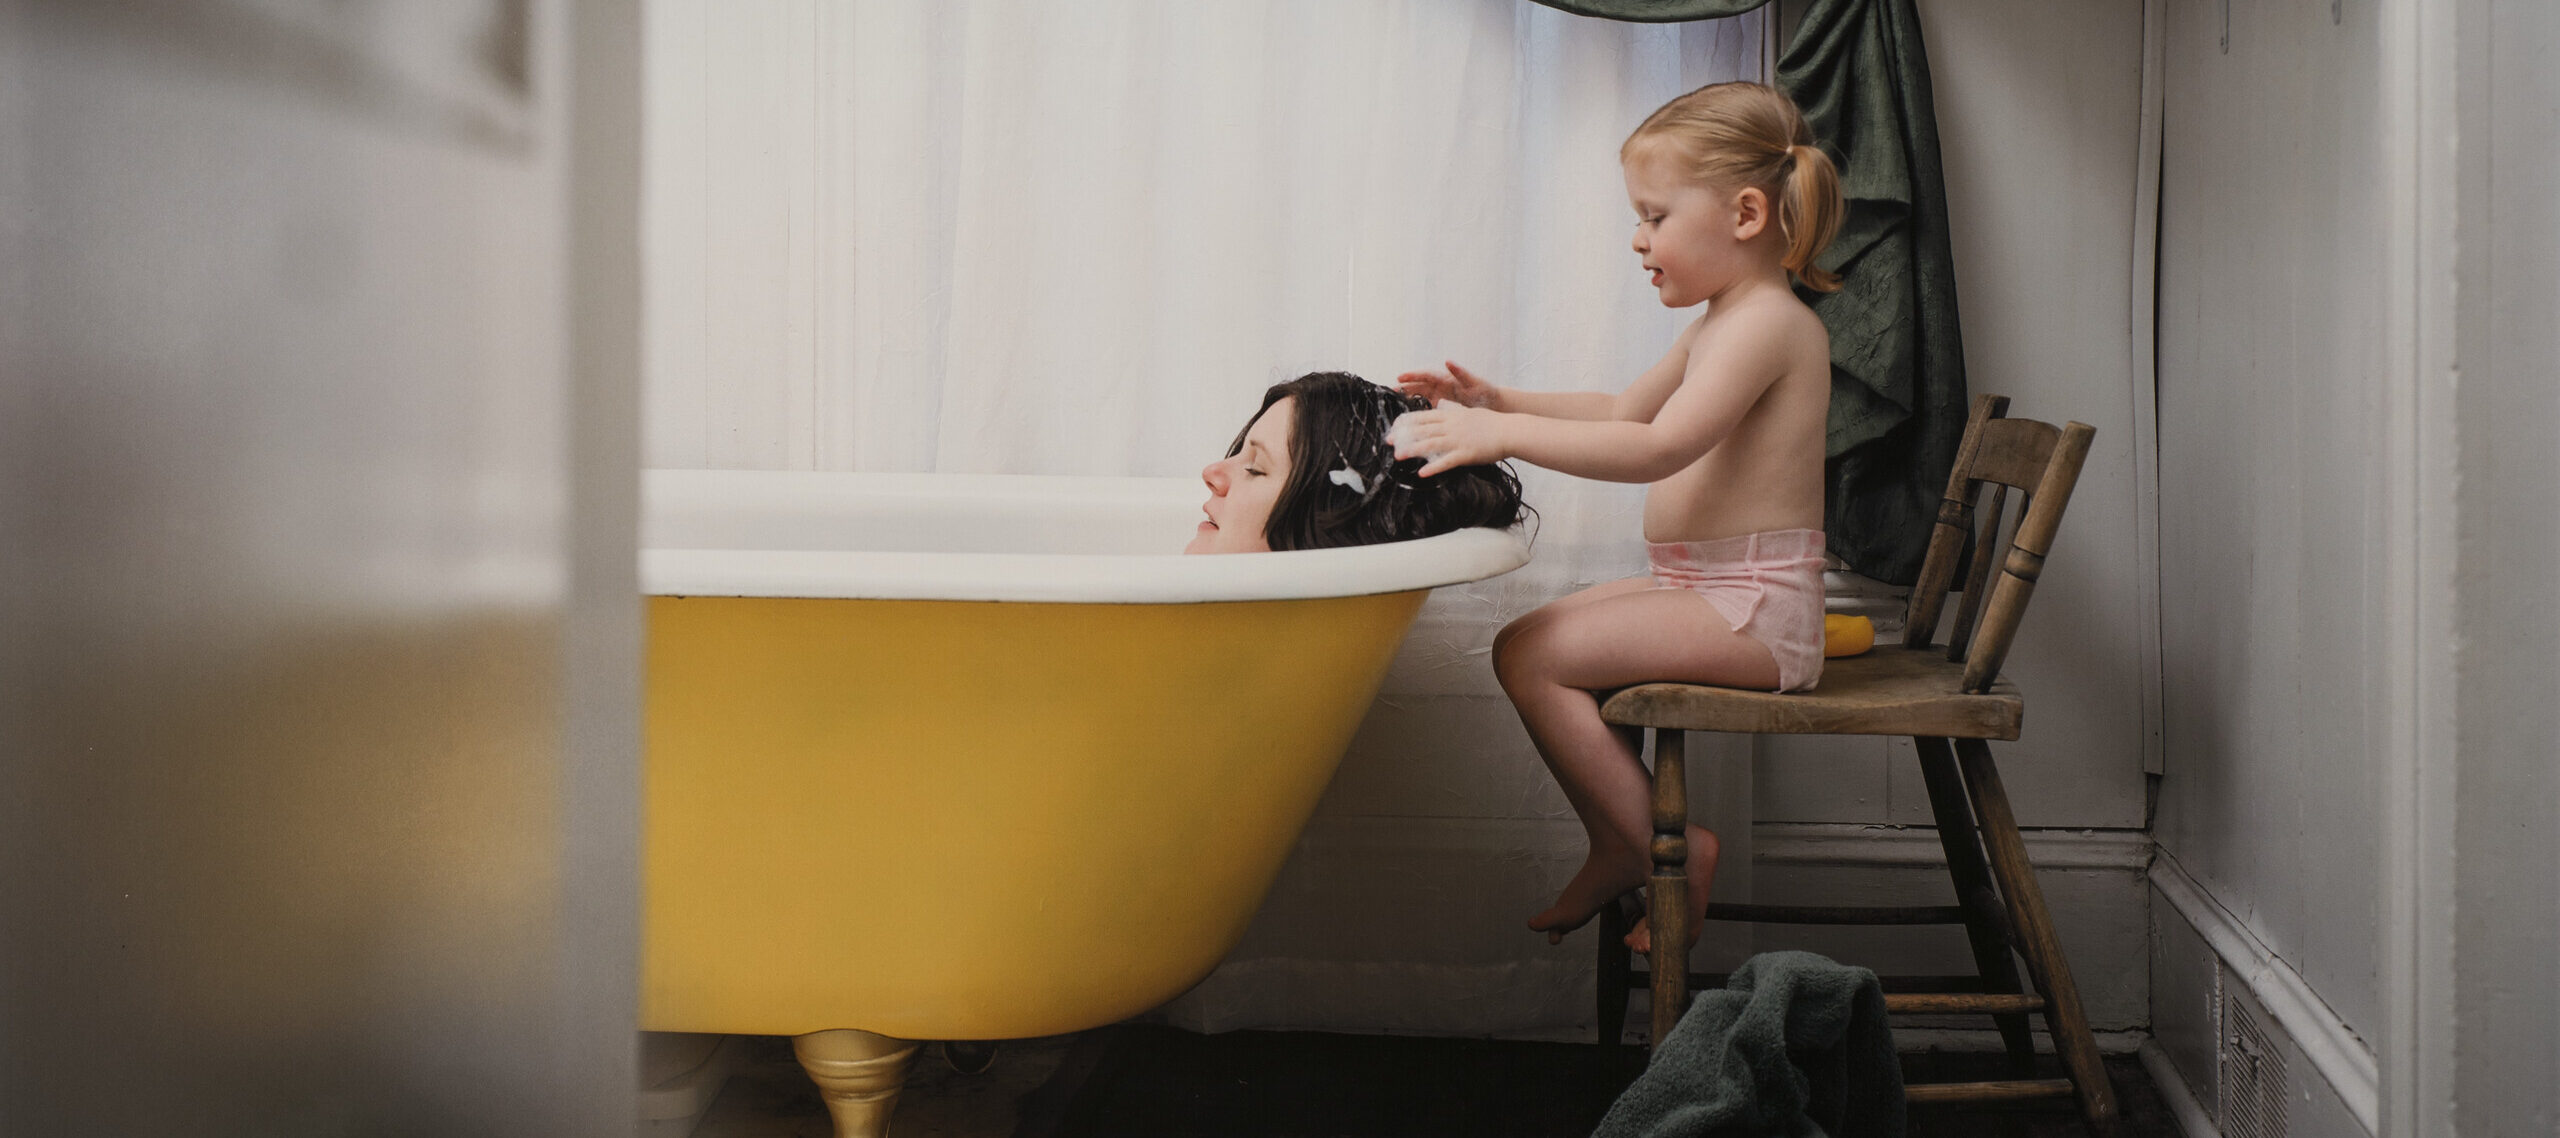 The head of a brunette woman with her eyes closed is visible above the rim of a yellow claw-footed bathtub. Behind the woman, a little girl in a pink diaper sits on a wooden chair and runs her soap-covered hands through the woman's hair.